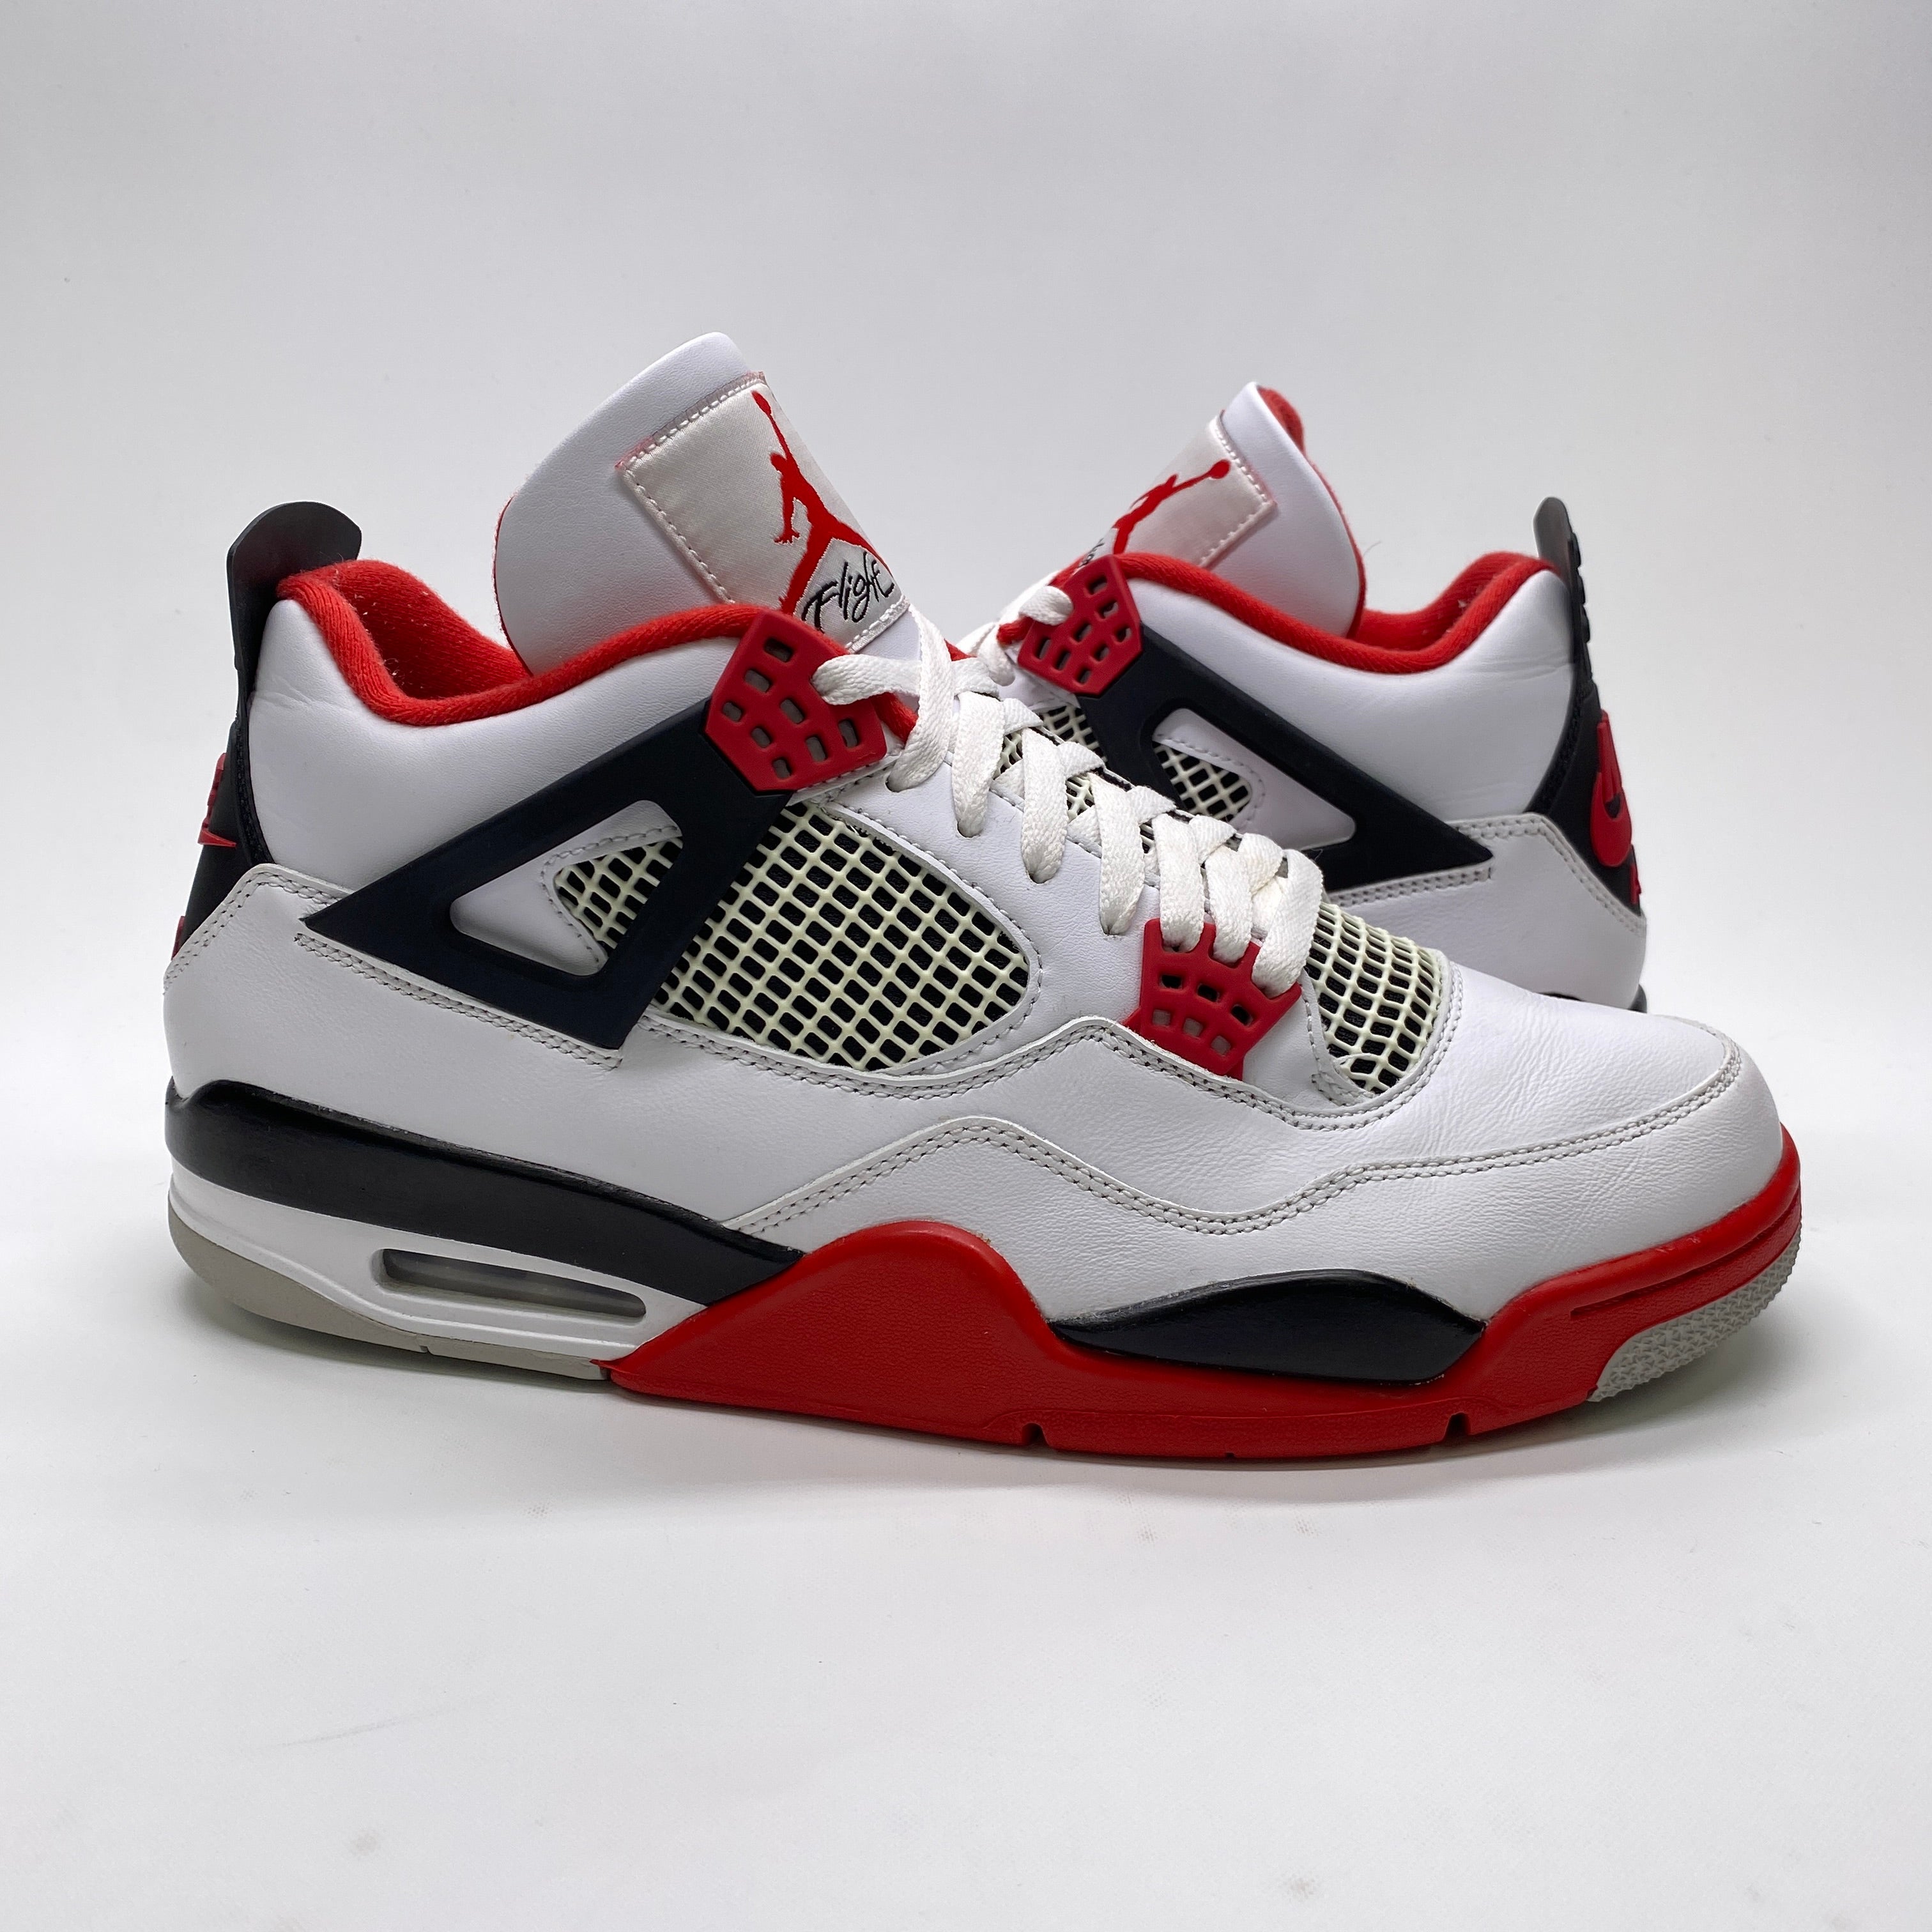 Air Jordan 4 Retro &quot;Fire Red&quot; 2020 Used Size 12